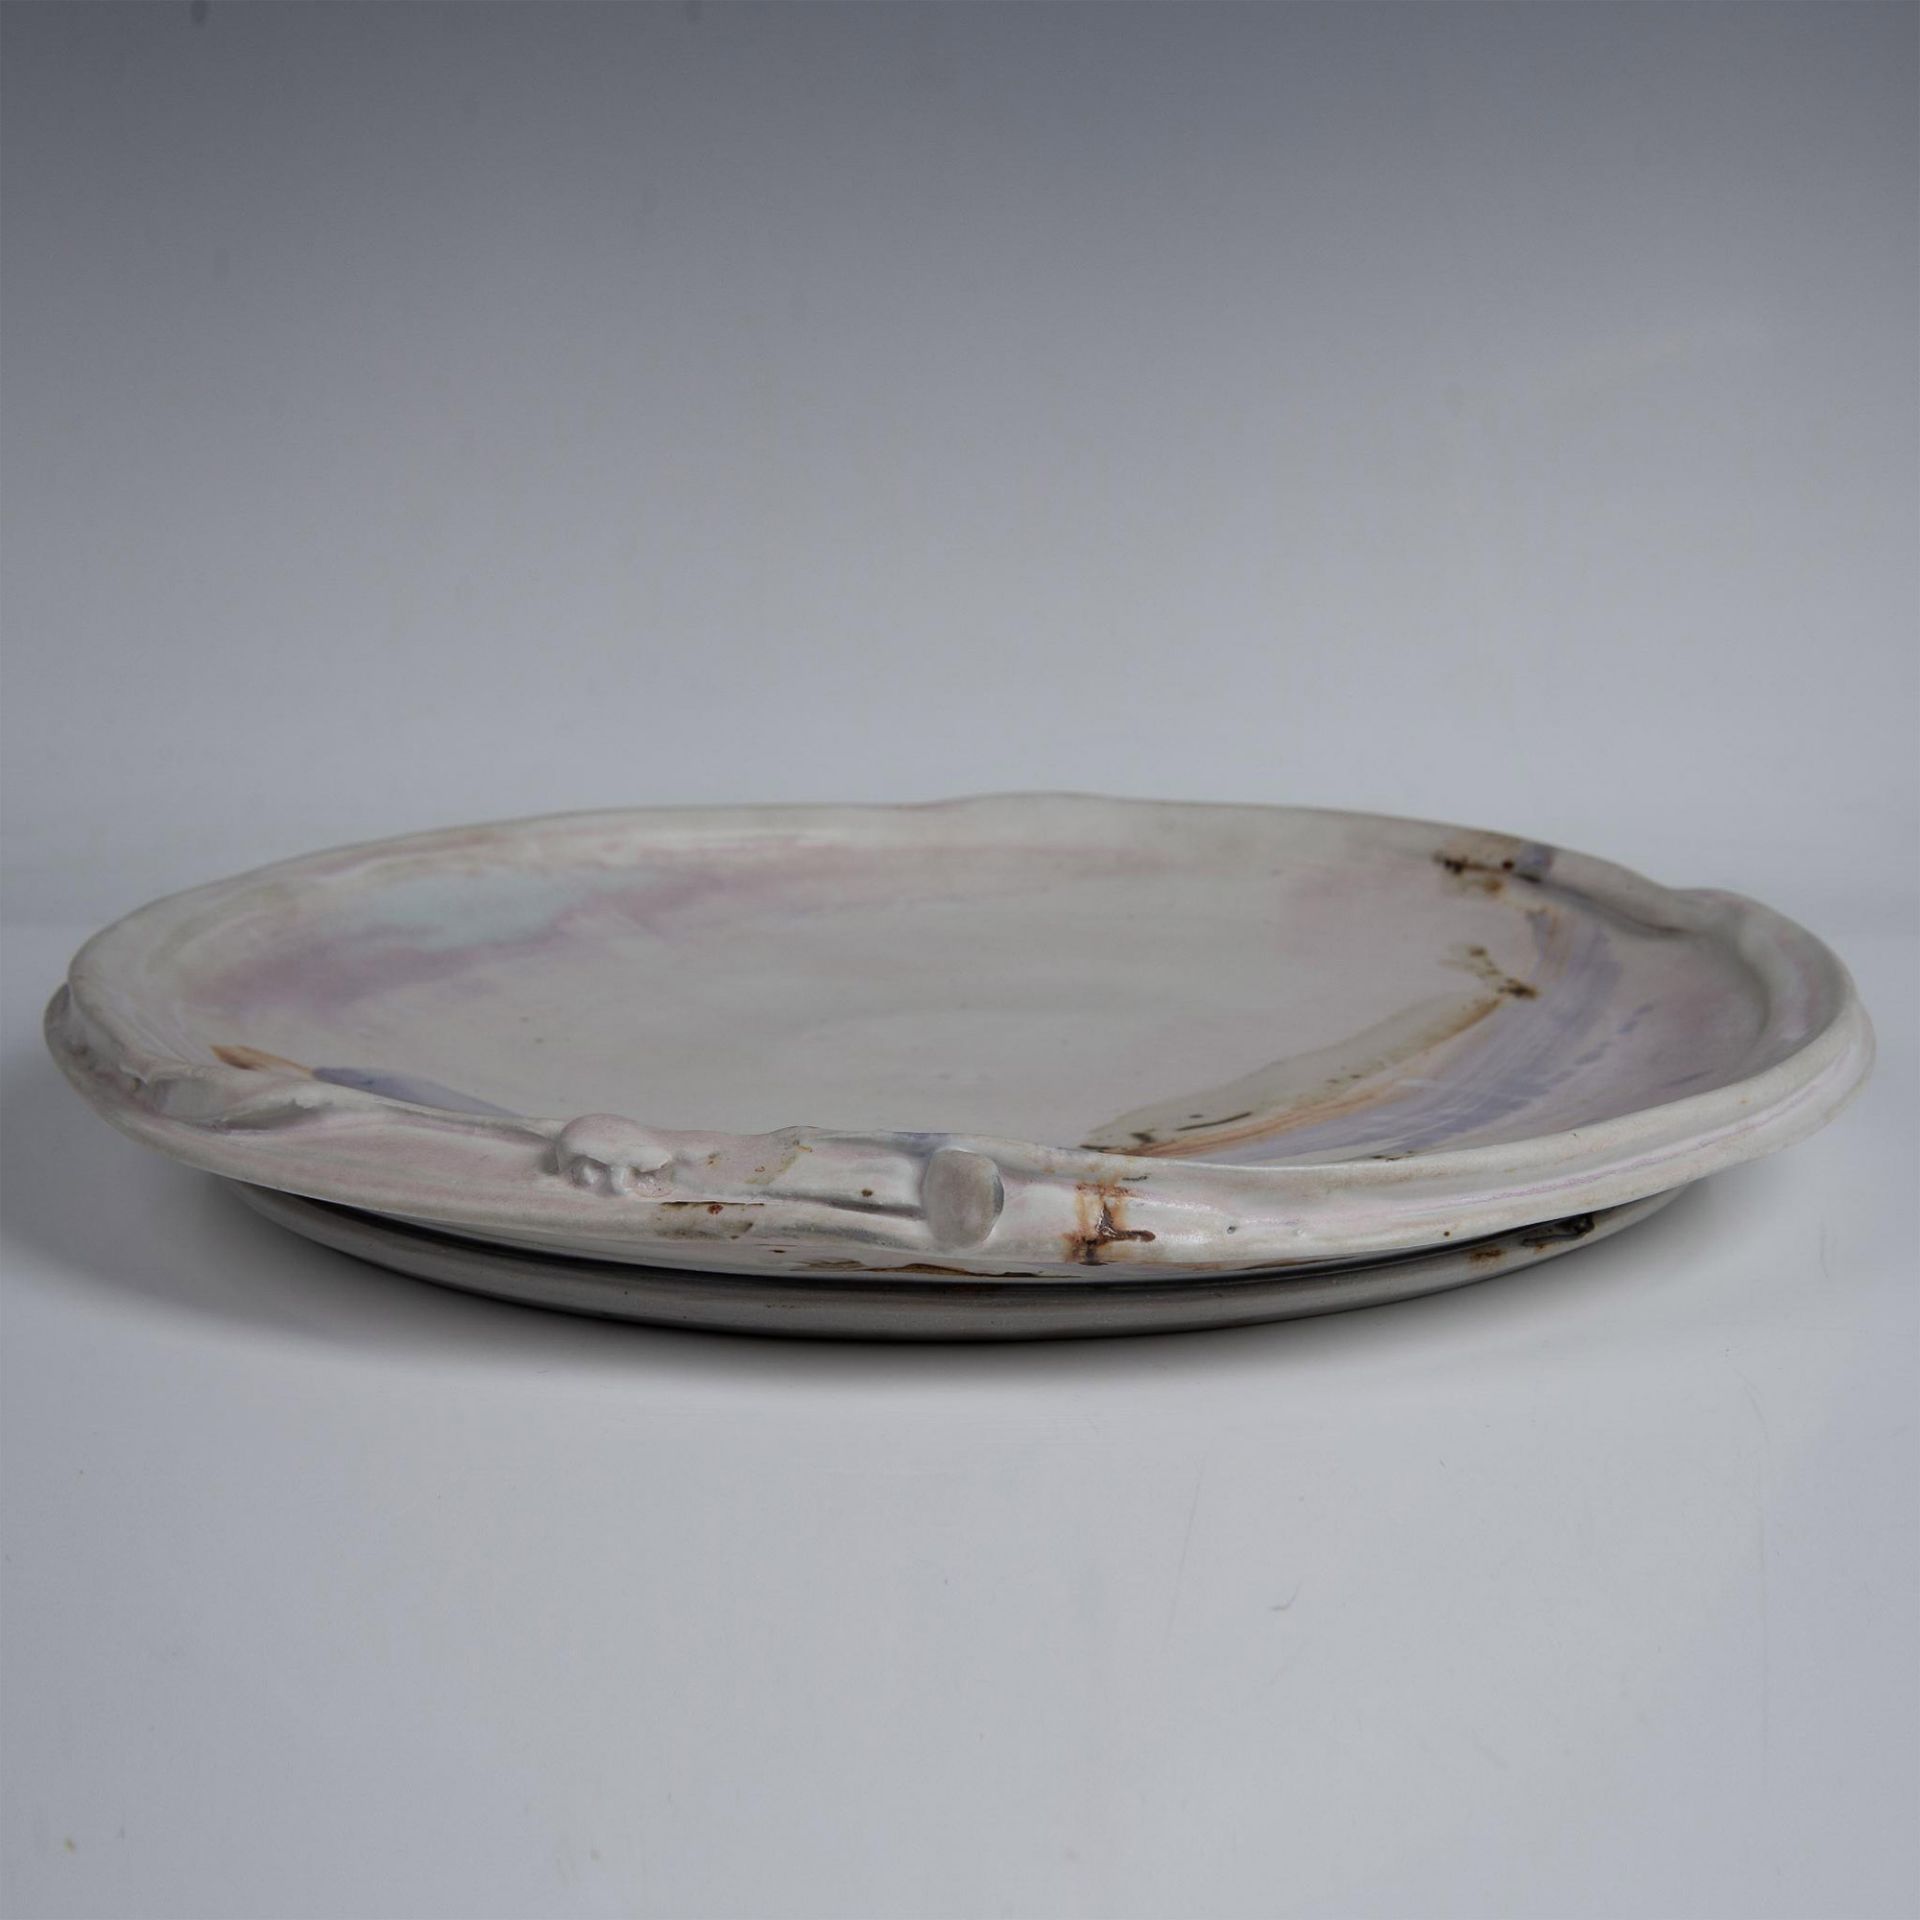 Studio Art Pottery Large Round Charger / Wall Plate - Image 6 of 6